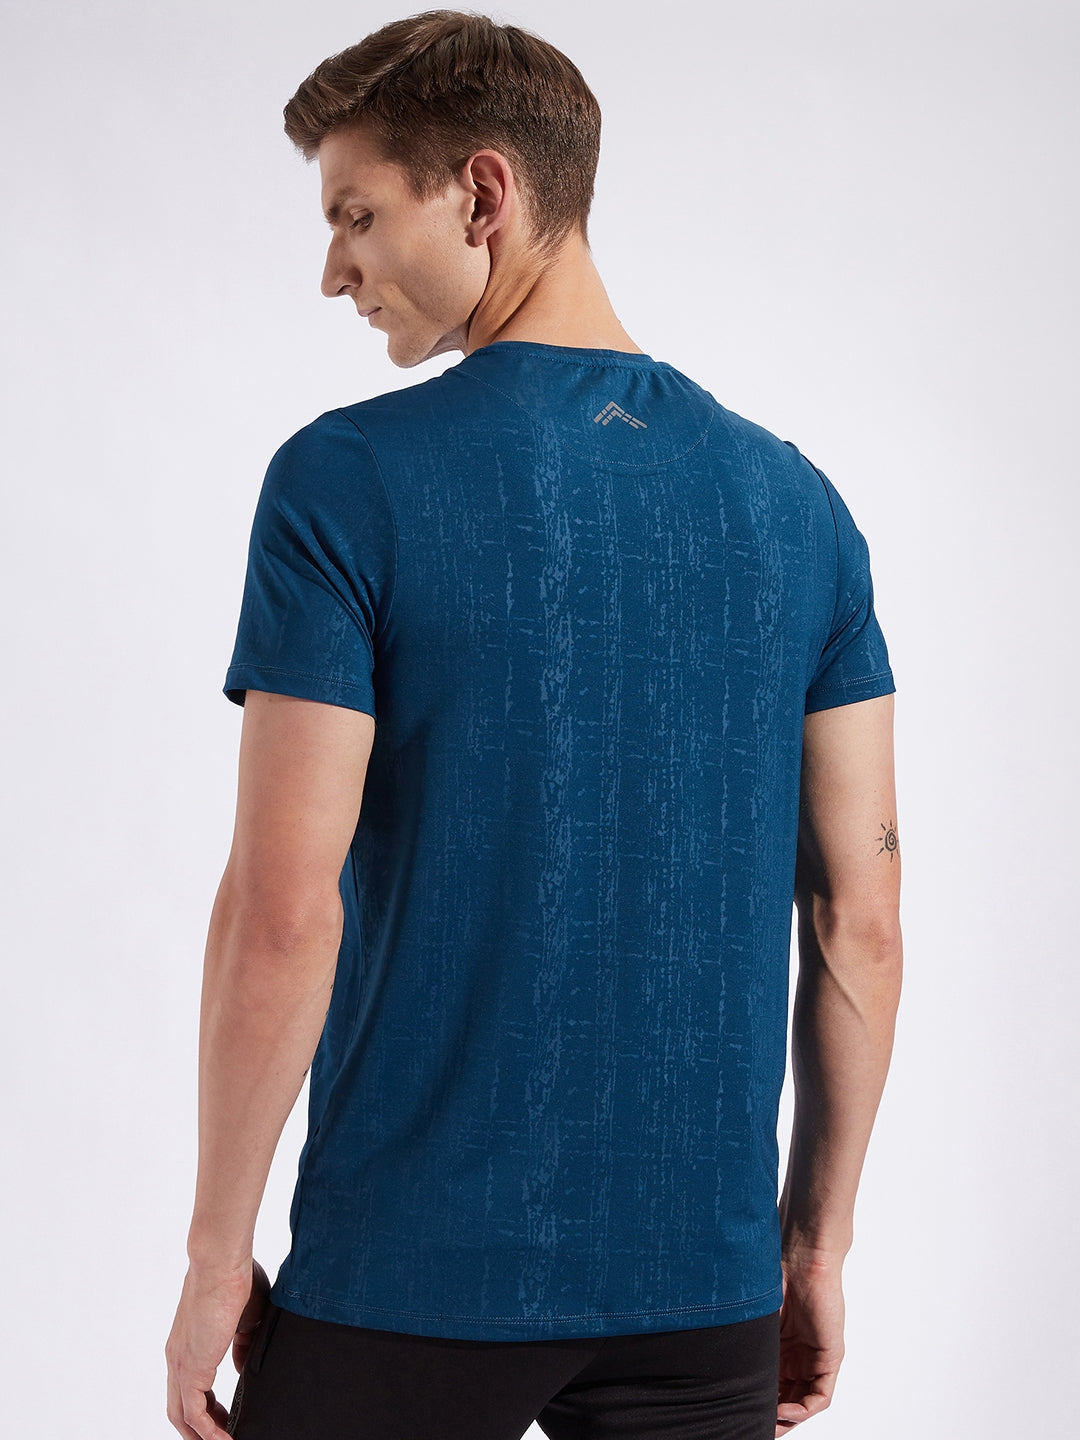 Abstract Embossed T-shirt